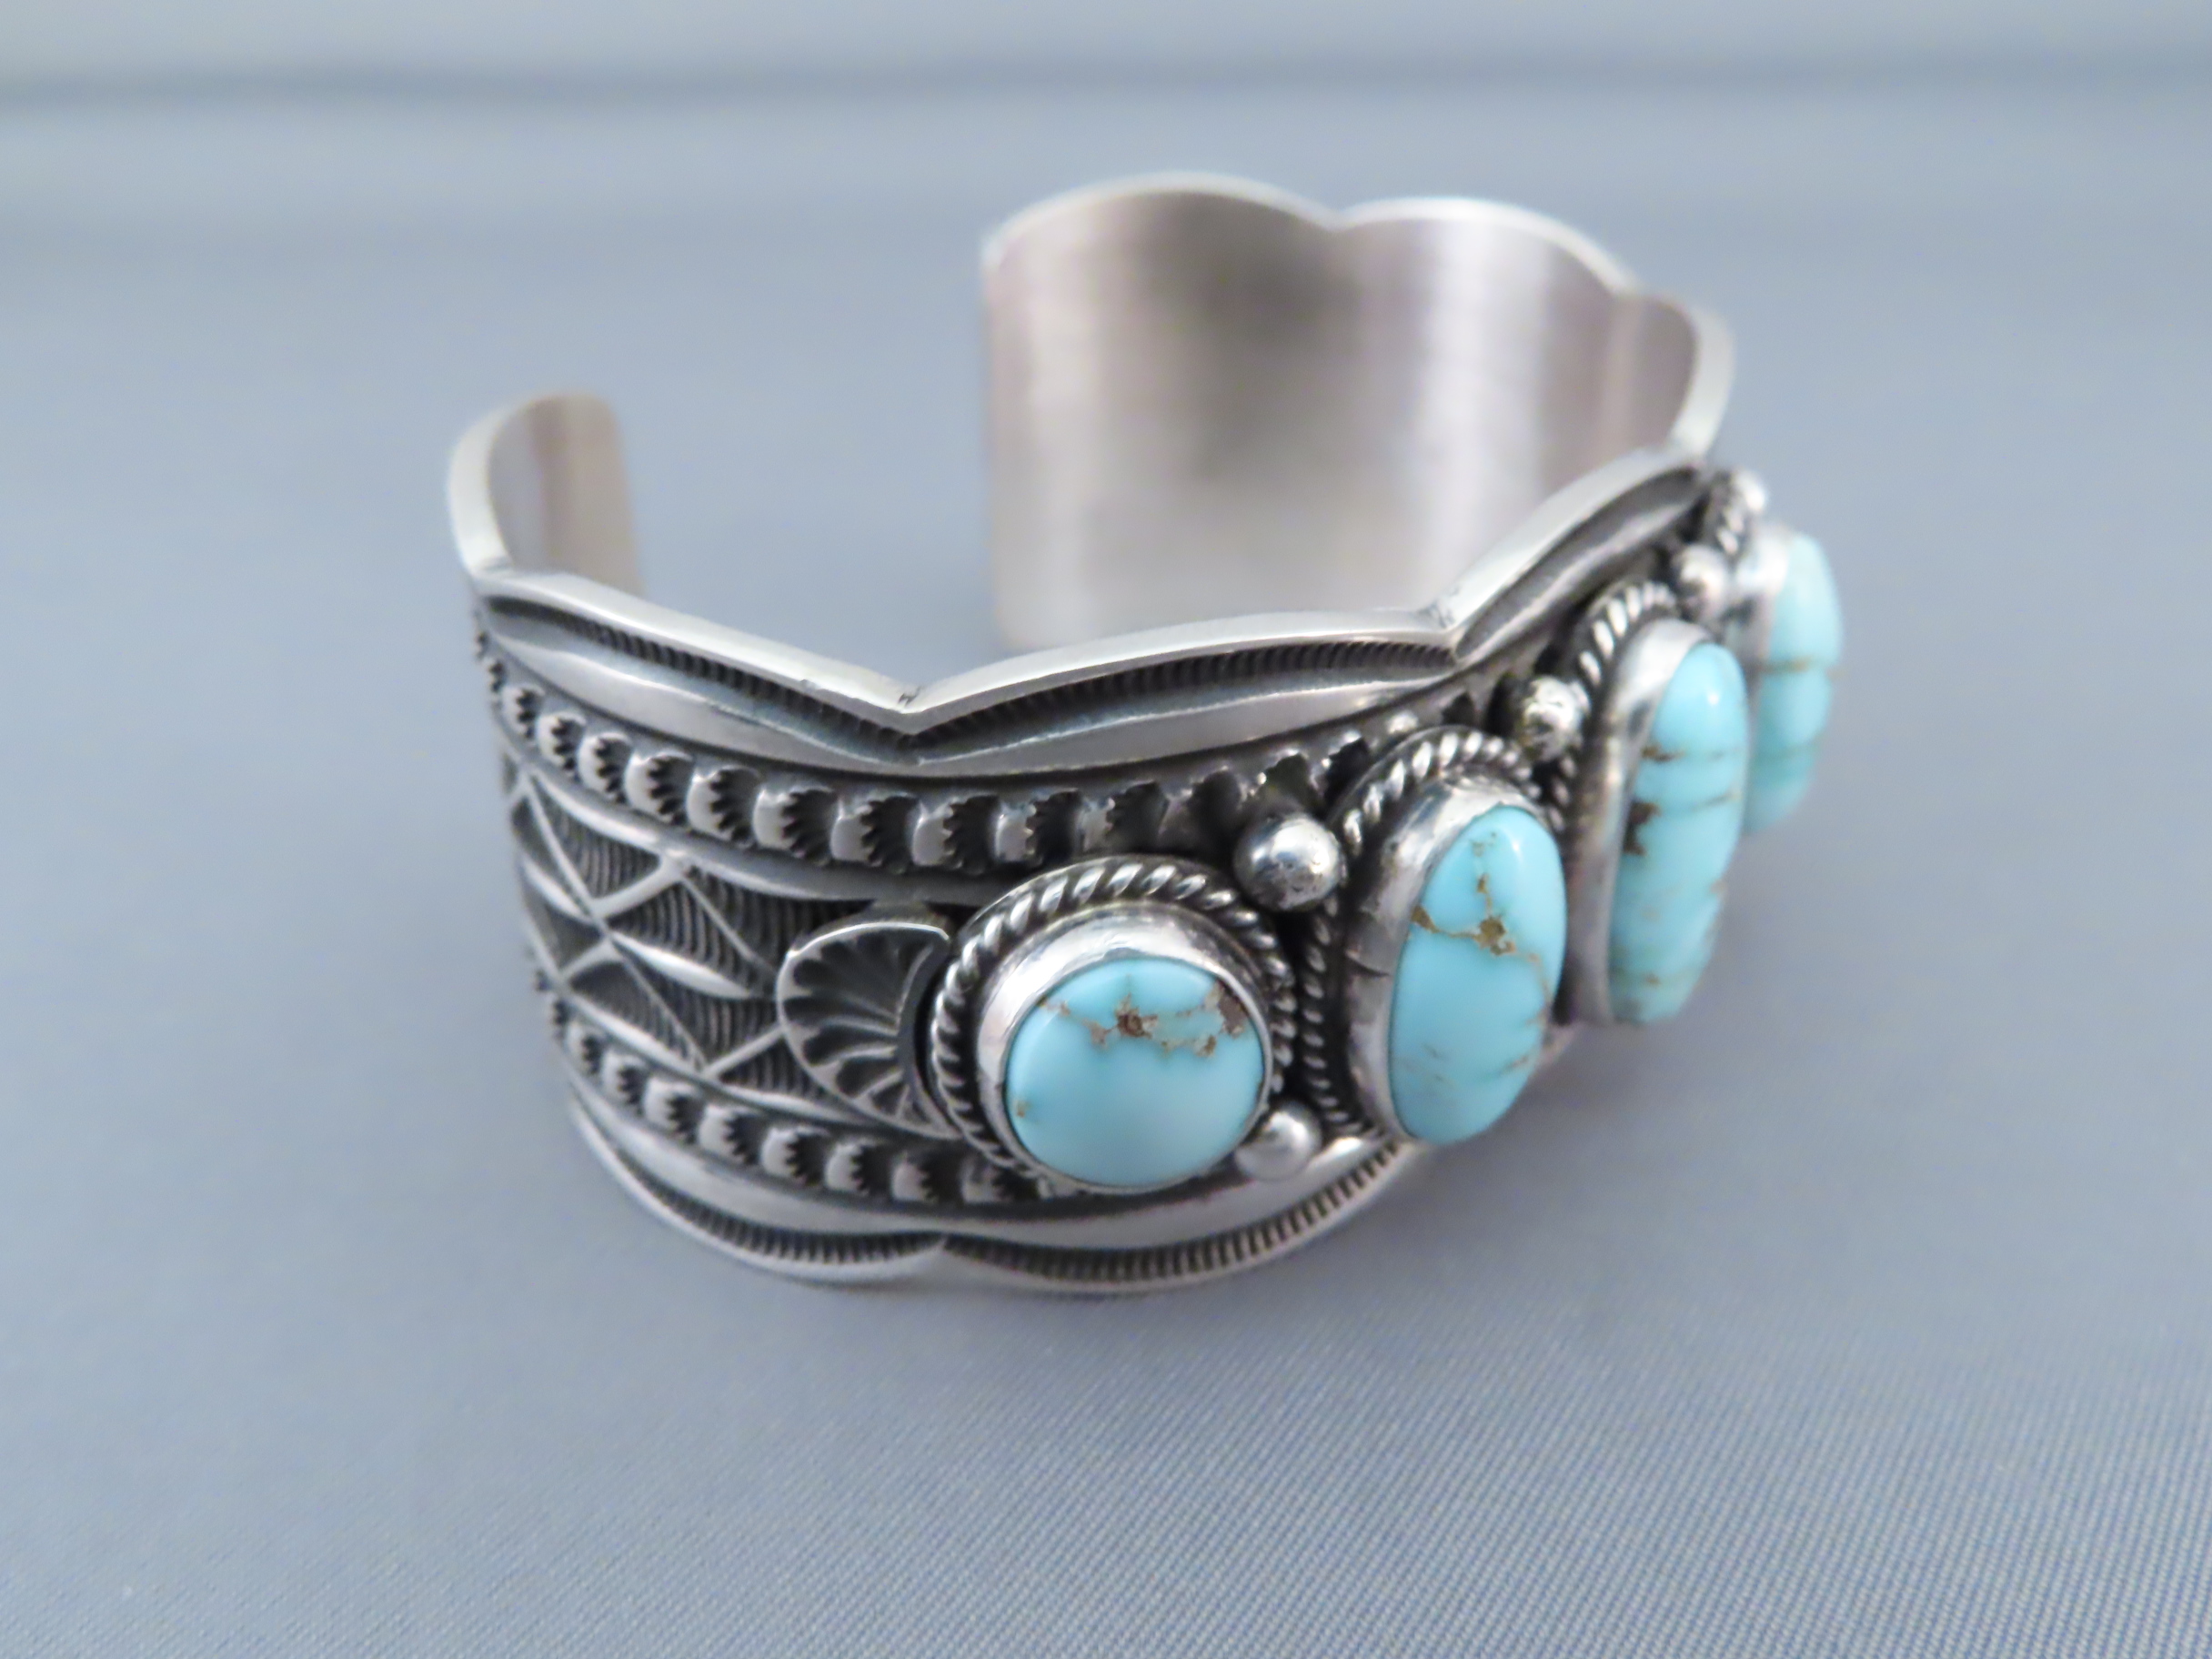 Dry Creek Turquoise Cuff Bracelet by Andy Cadman - Navajo Jewelry